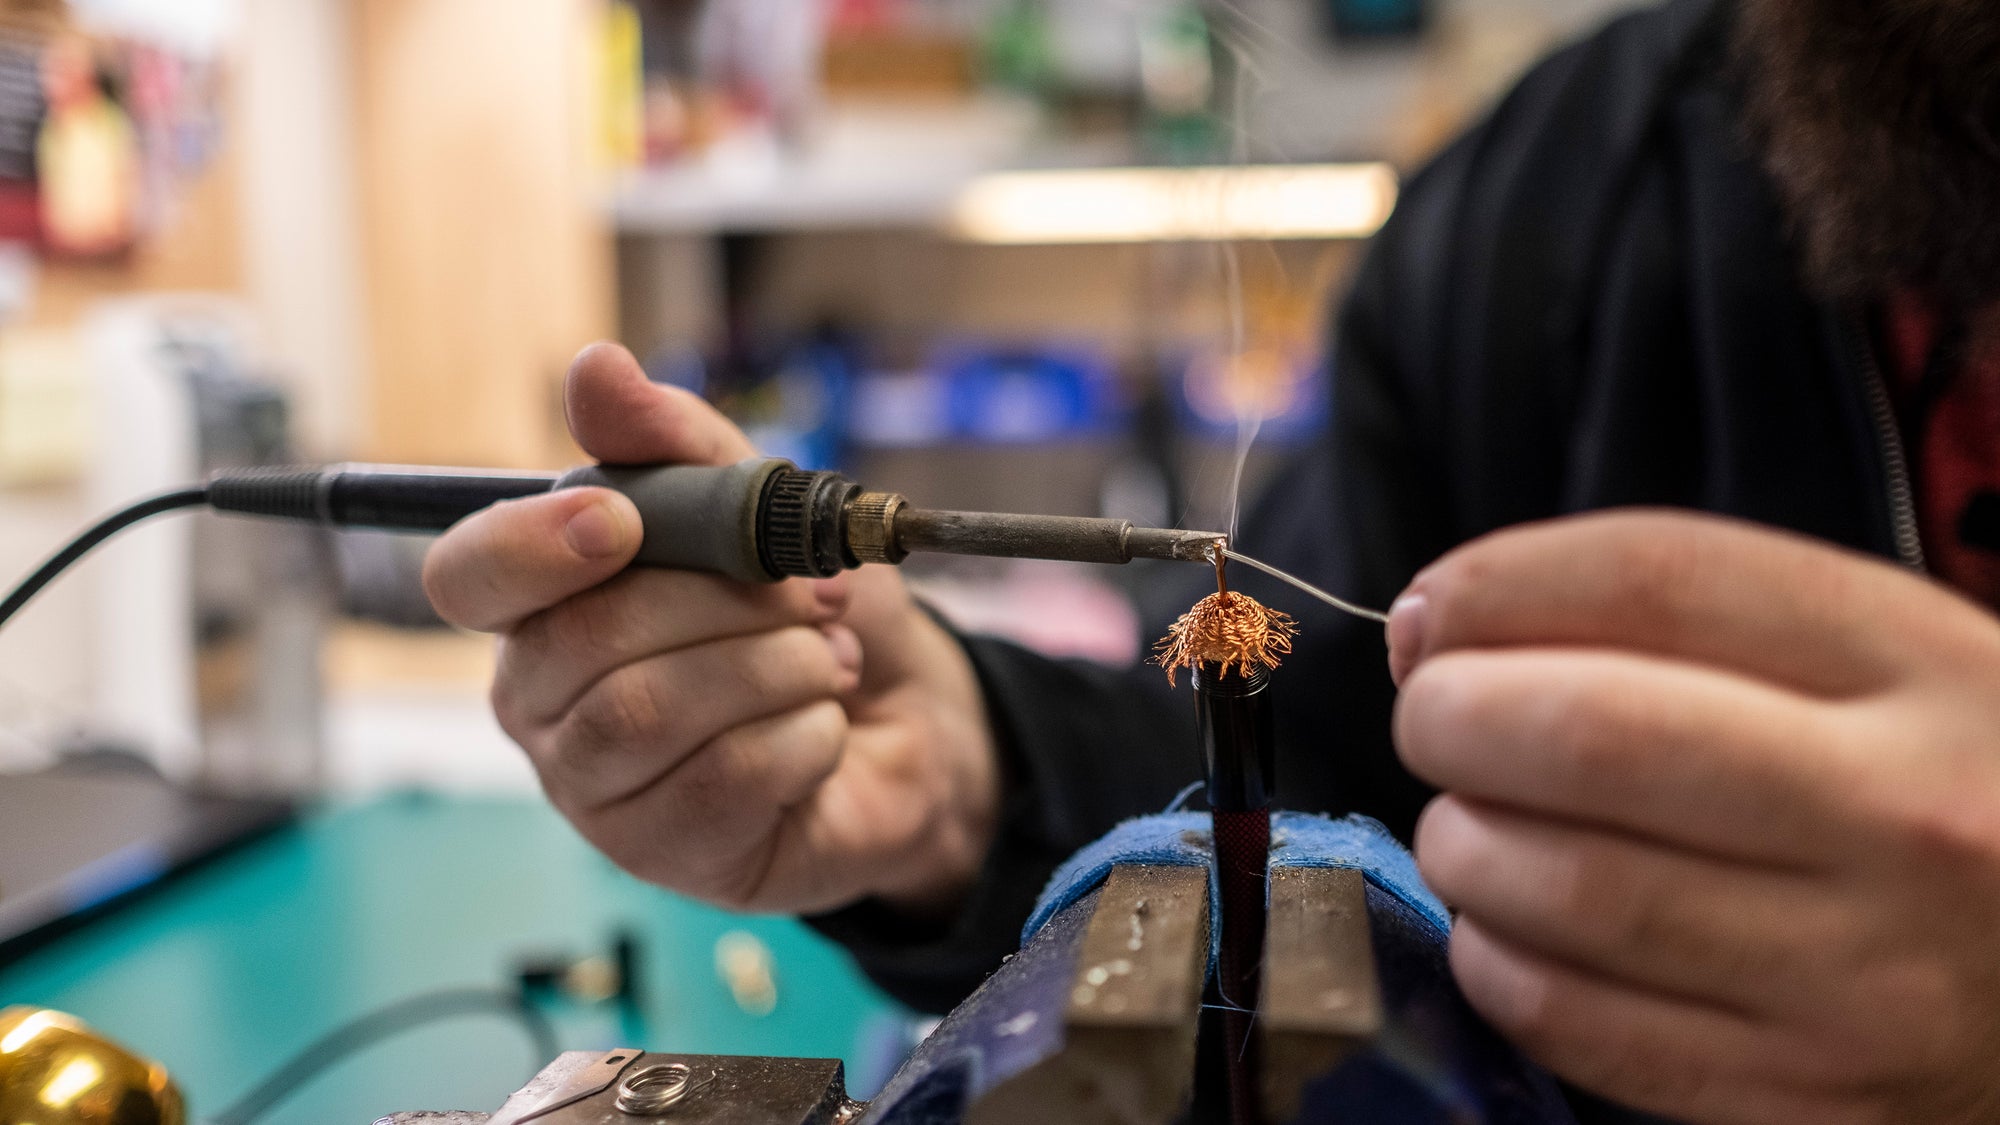 A man is working on a wire in a workshop.